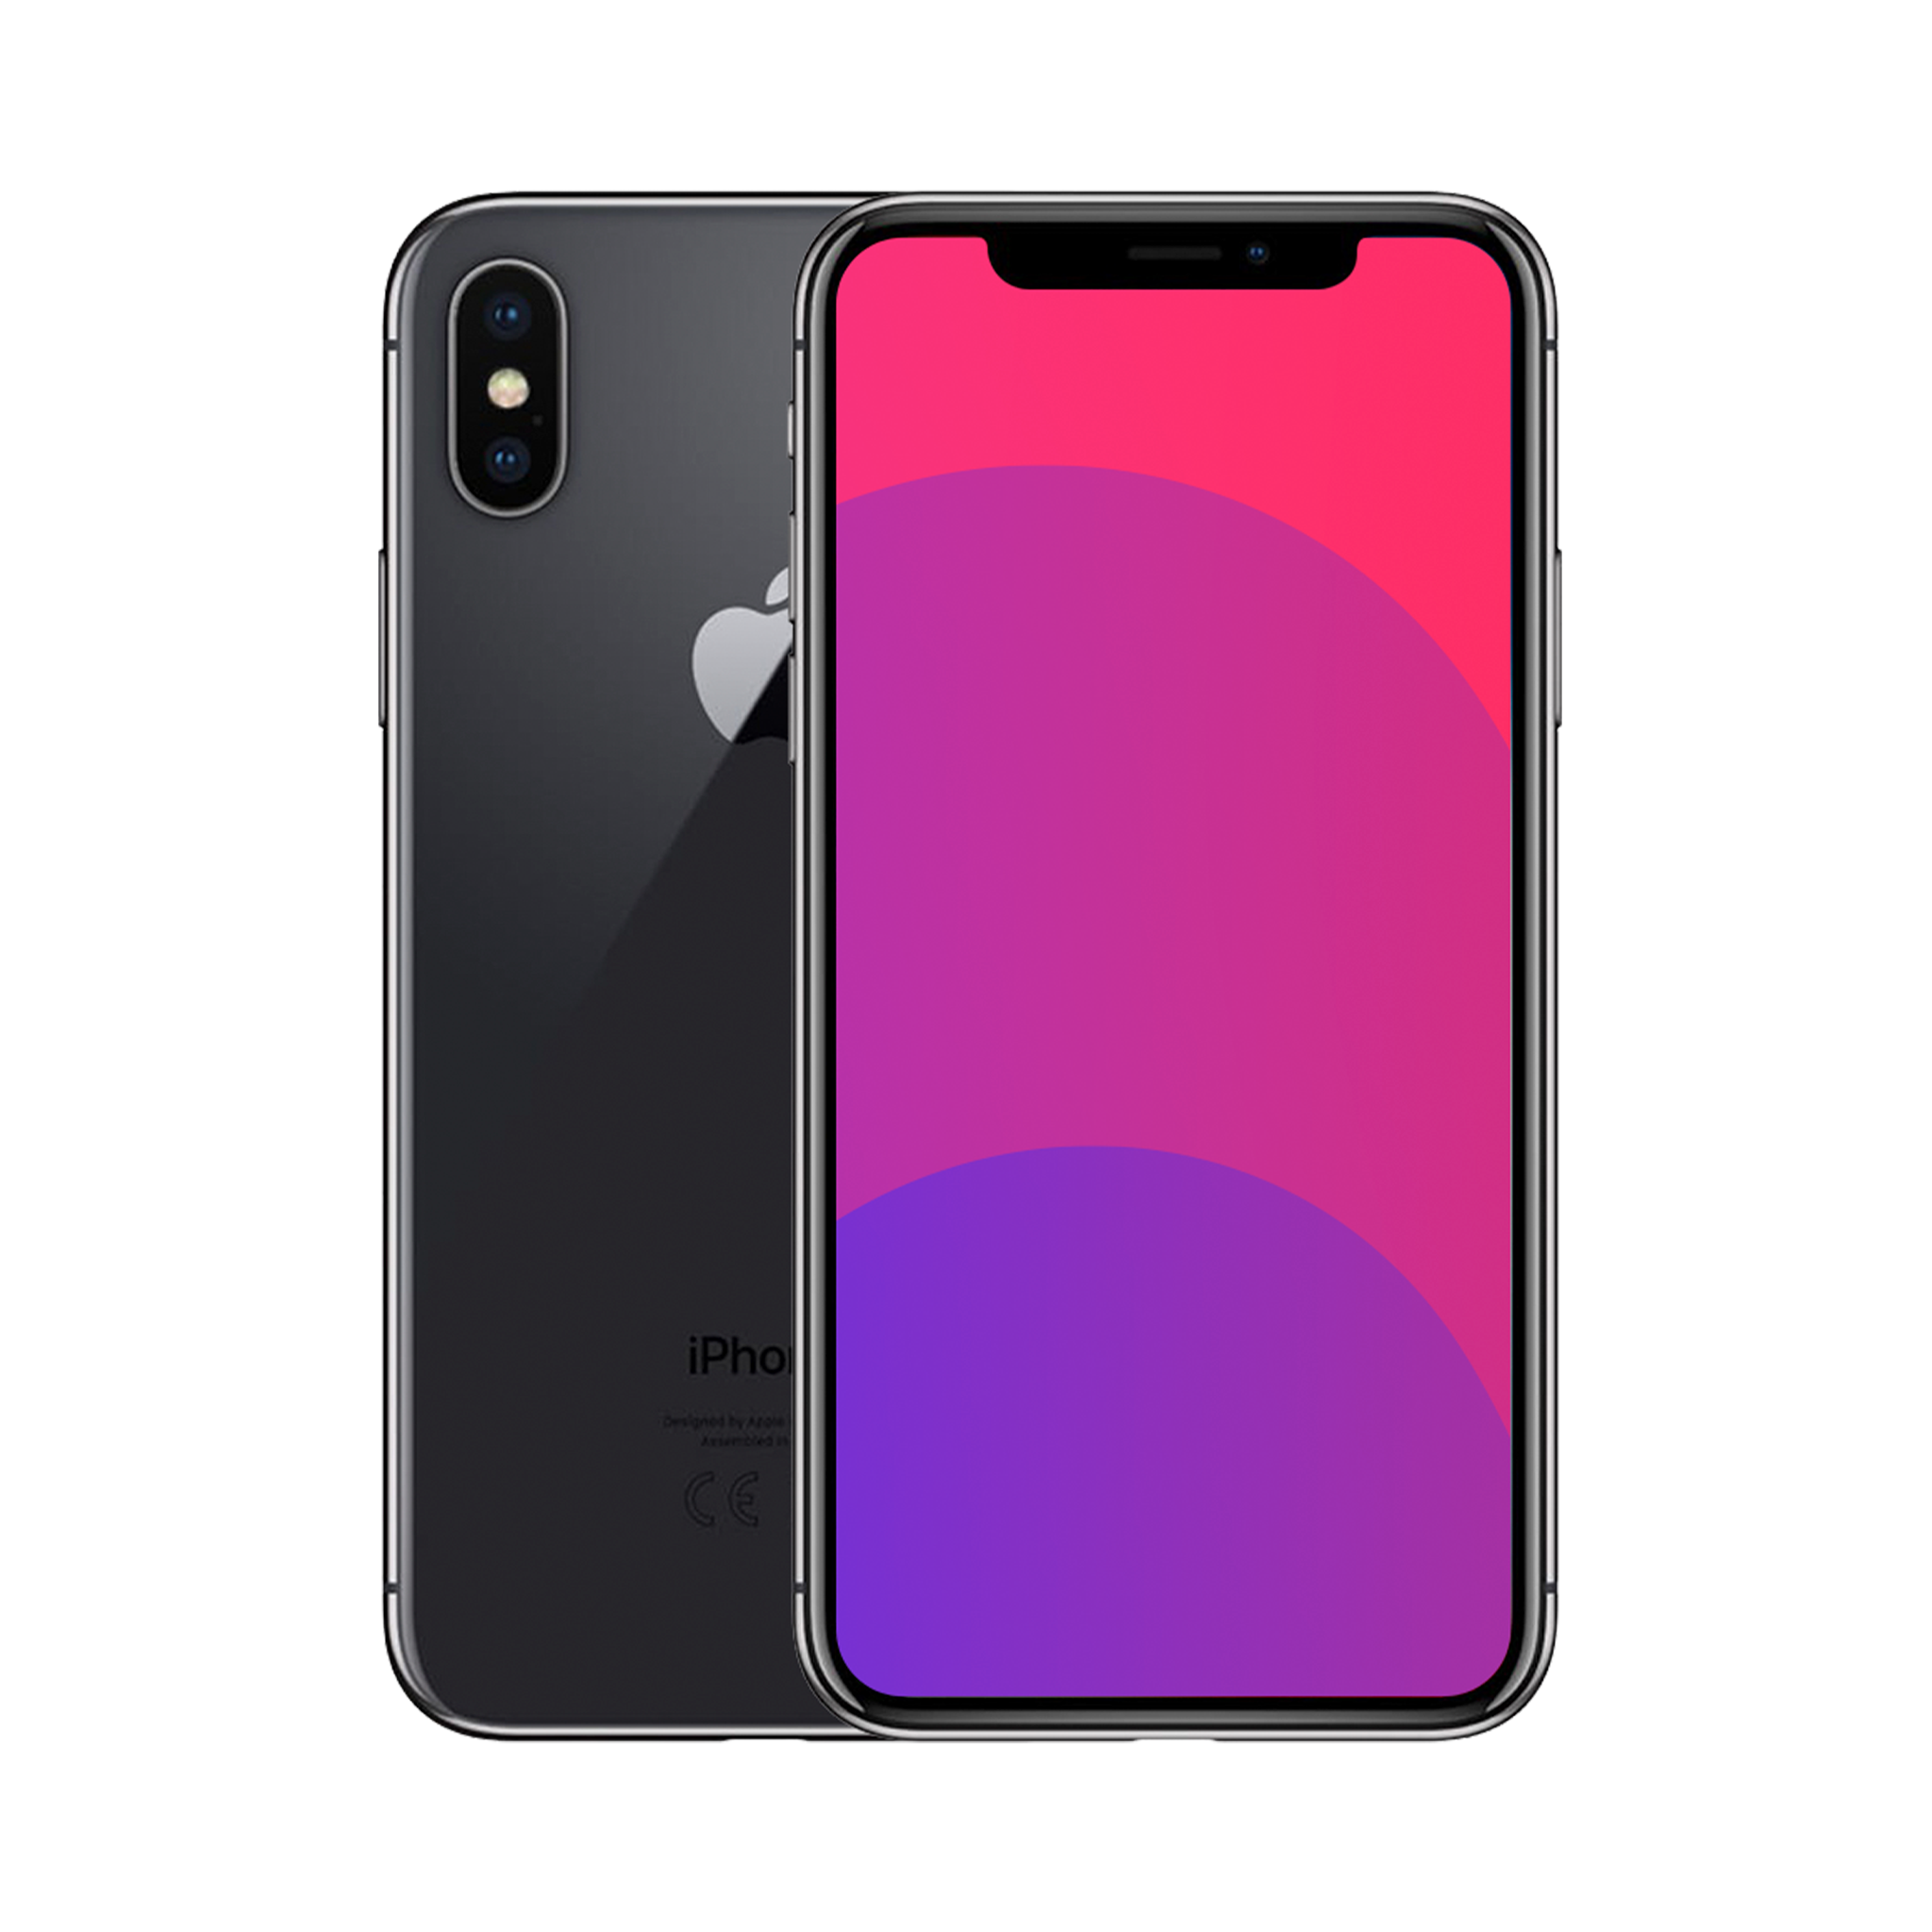 Apple iPhone X 256GB Space Grey - weFix | Buy Second Hand Phones, Trade In  your device or Book a Repair